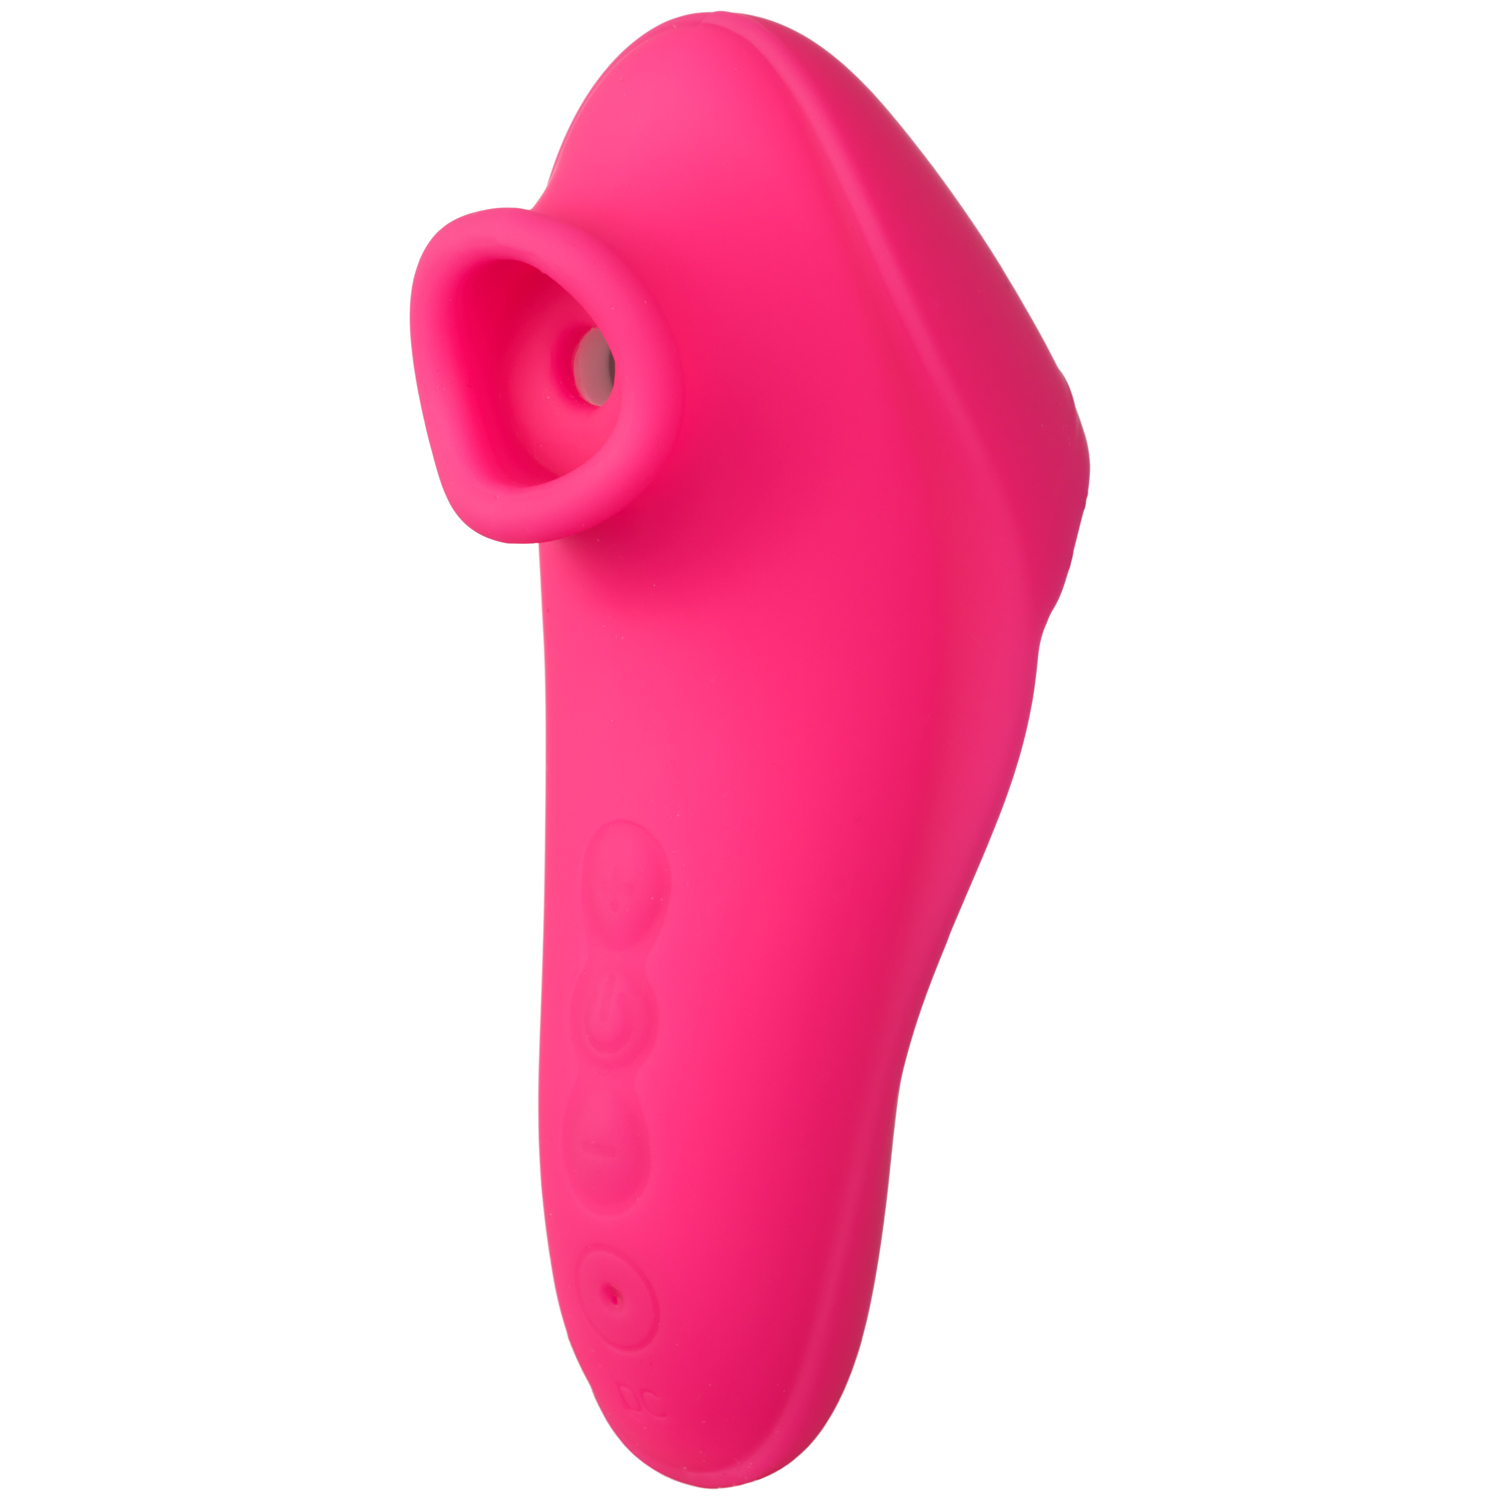 TracyÂ´s Dog Tracy&apos;s Dog Mage Suction Finger Vibrator    - Pink